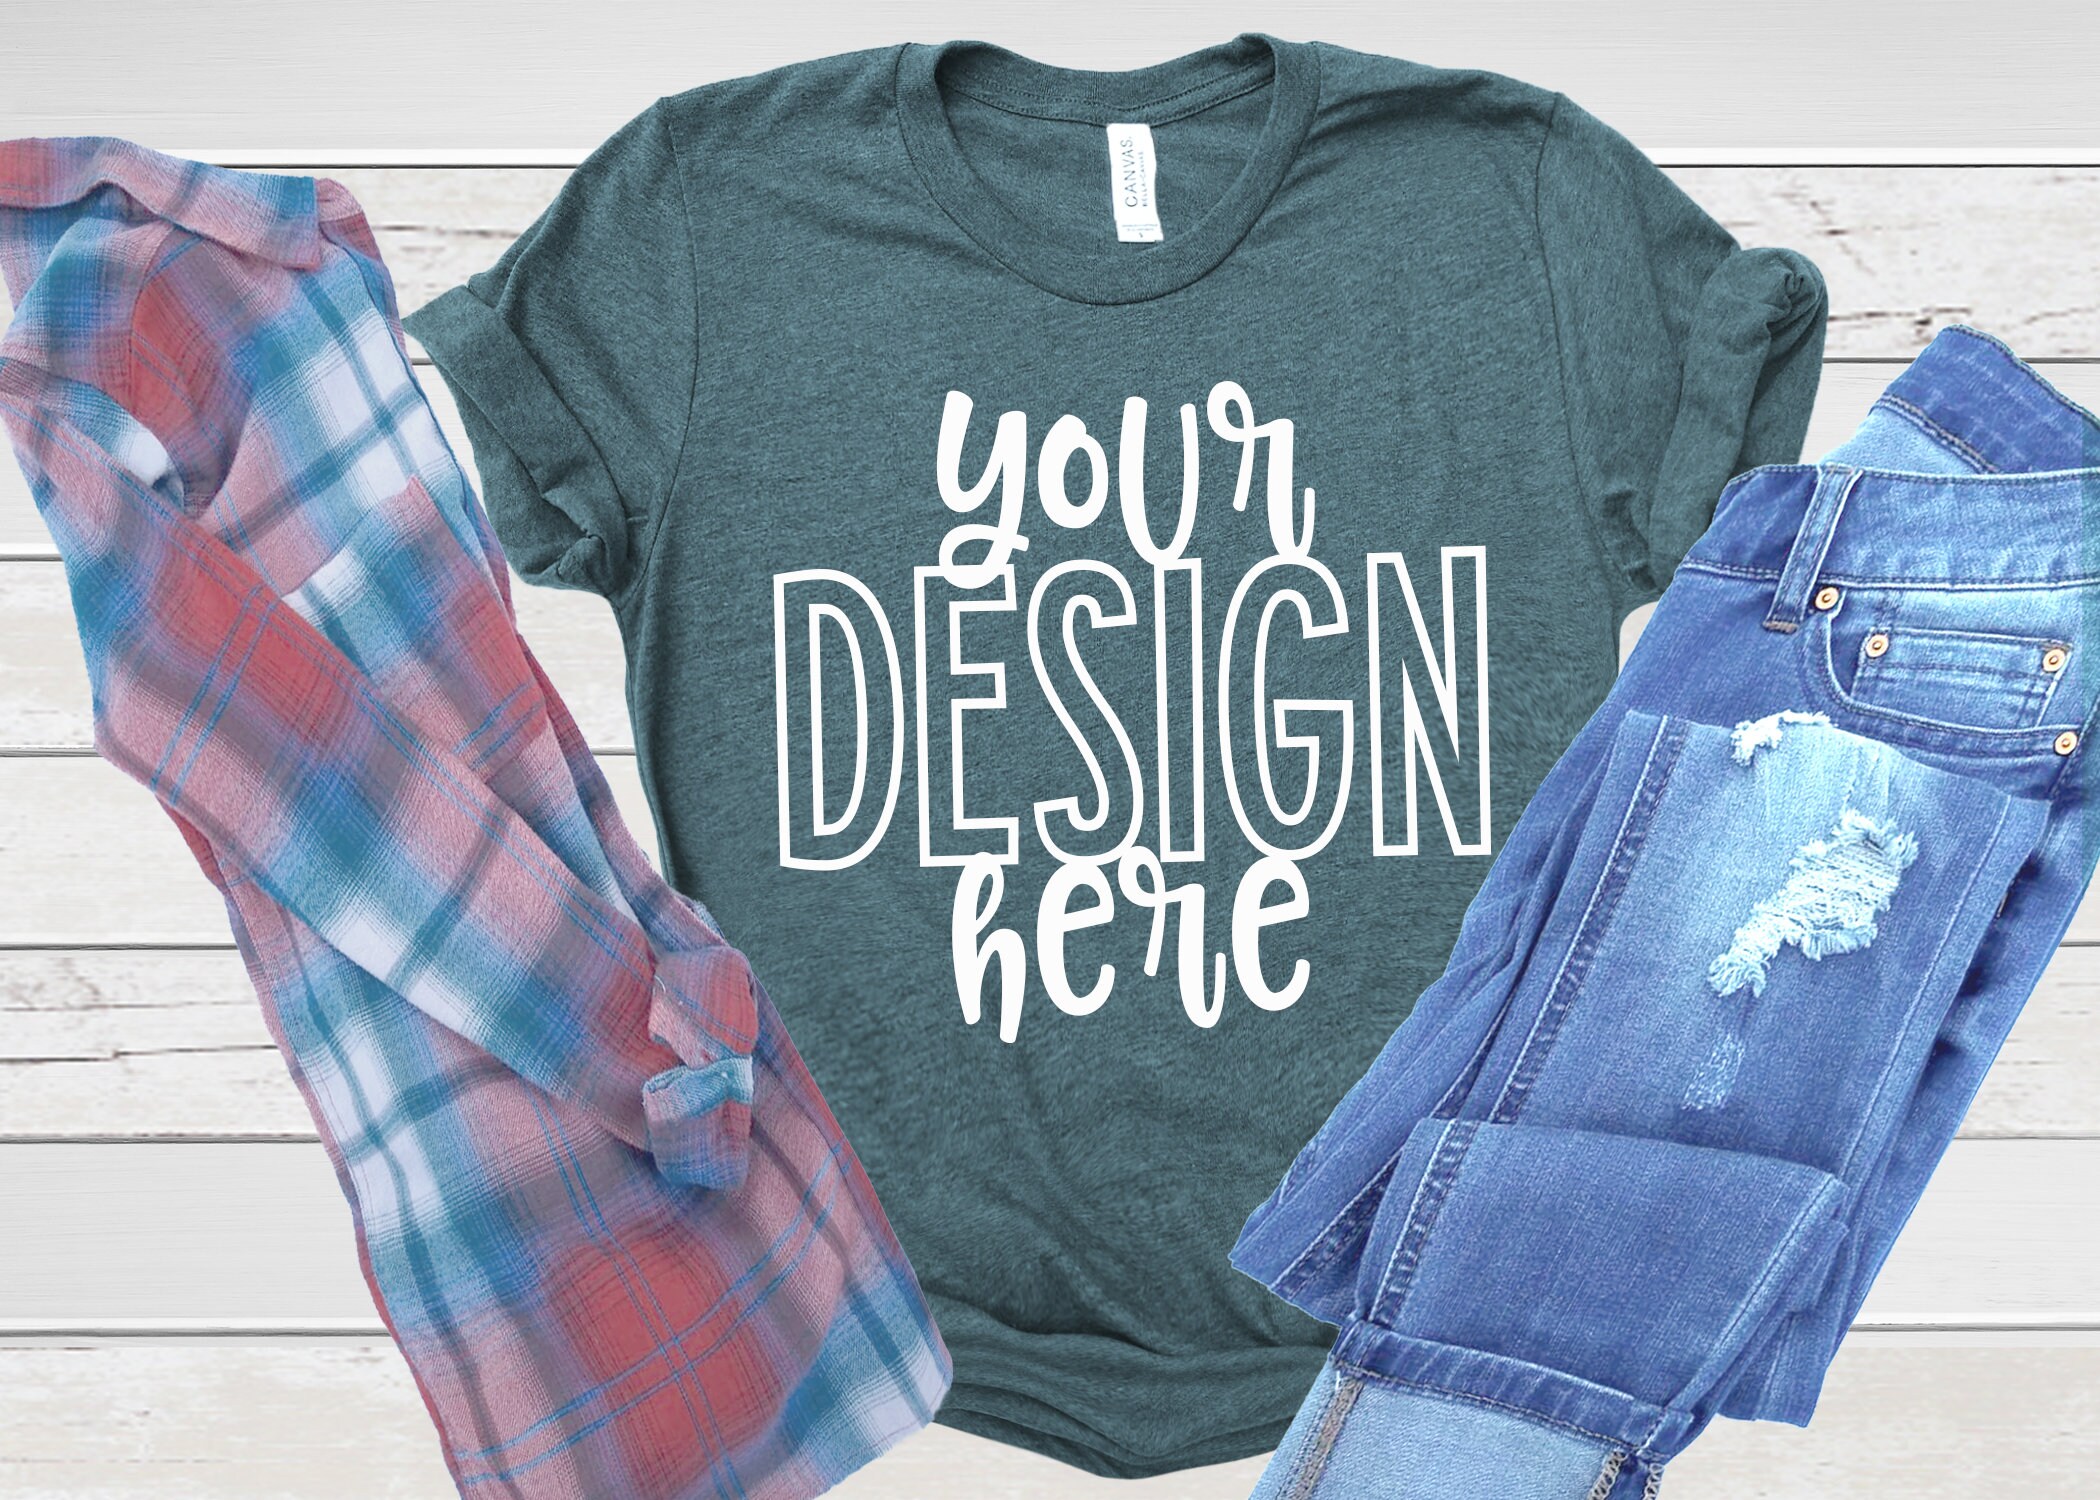 3001 Bella Heather Teal Flatlay T-shirt Mockup by the Printed | Etsy